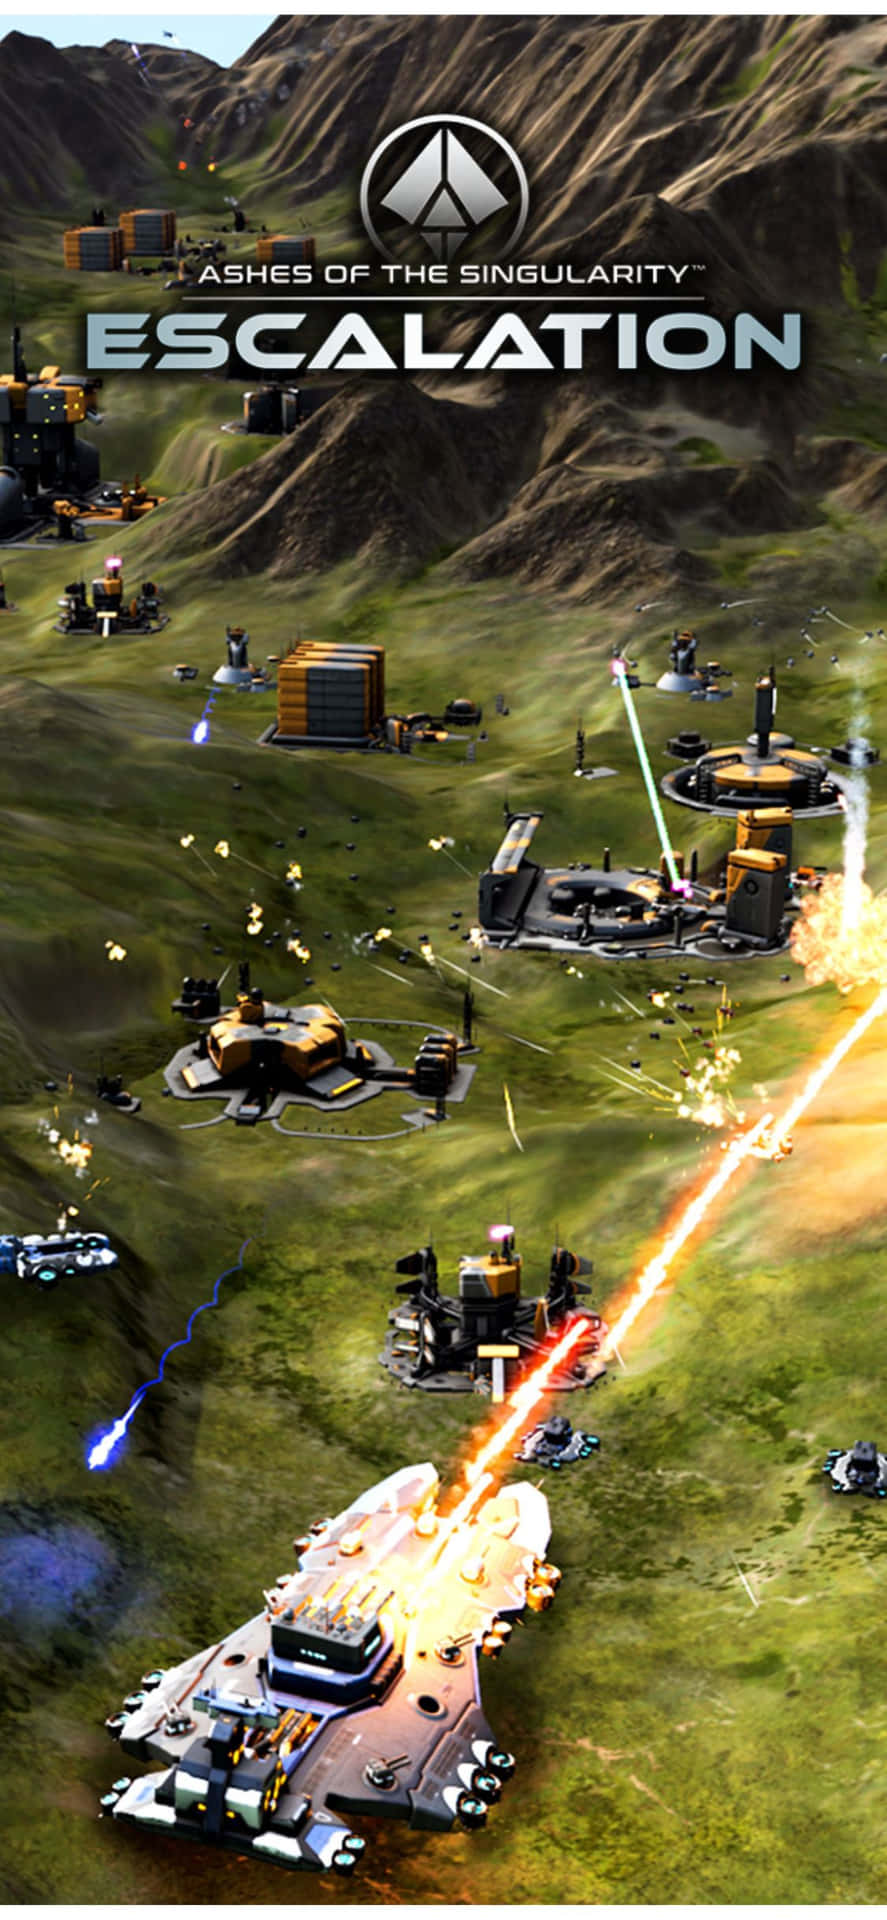 Get closer to the action with iPhone X&Ashes Of The Singularity Escalation